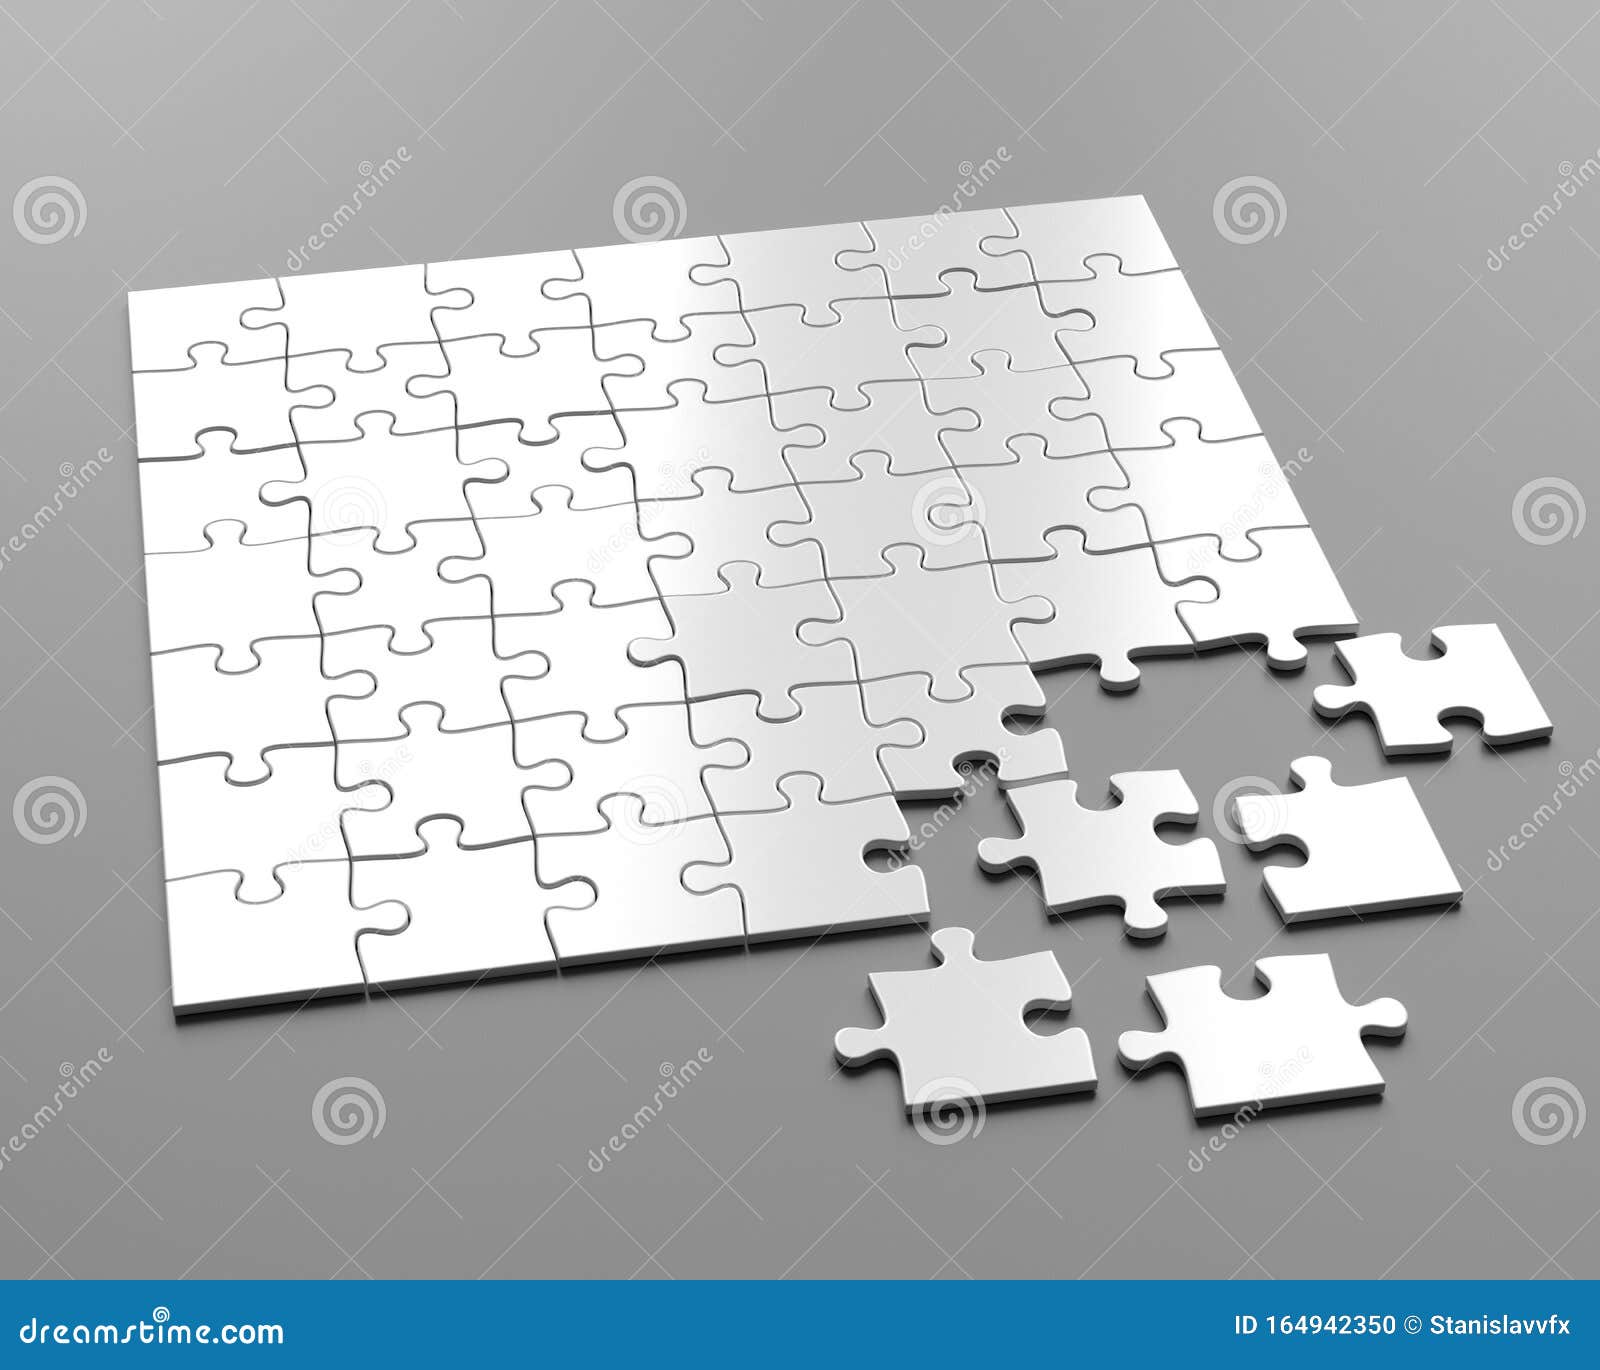 Download Solving Jigsaw Puzzle 7x7 Pieces Puzzle Mockup 3d Illustration Stock Illustration Illustration Of Jigsaw Connection 164942350